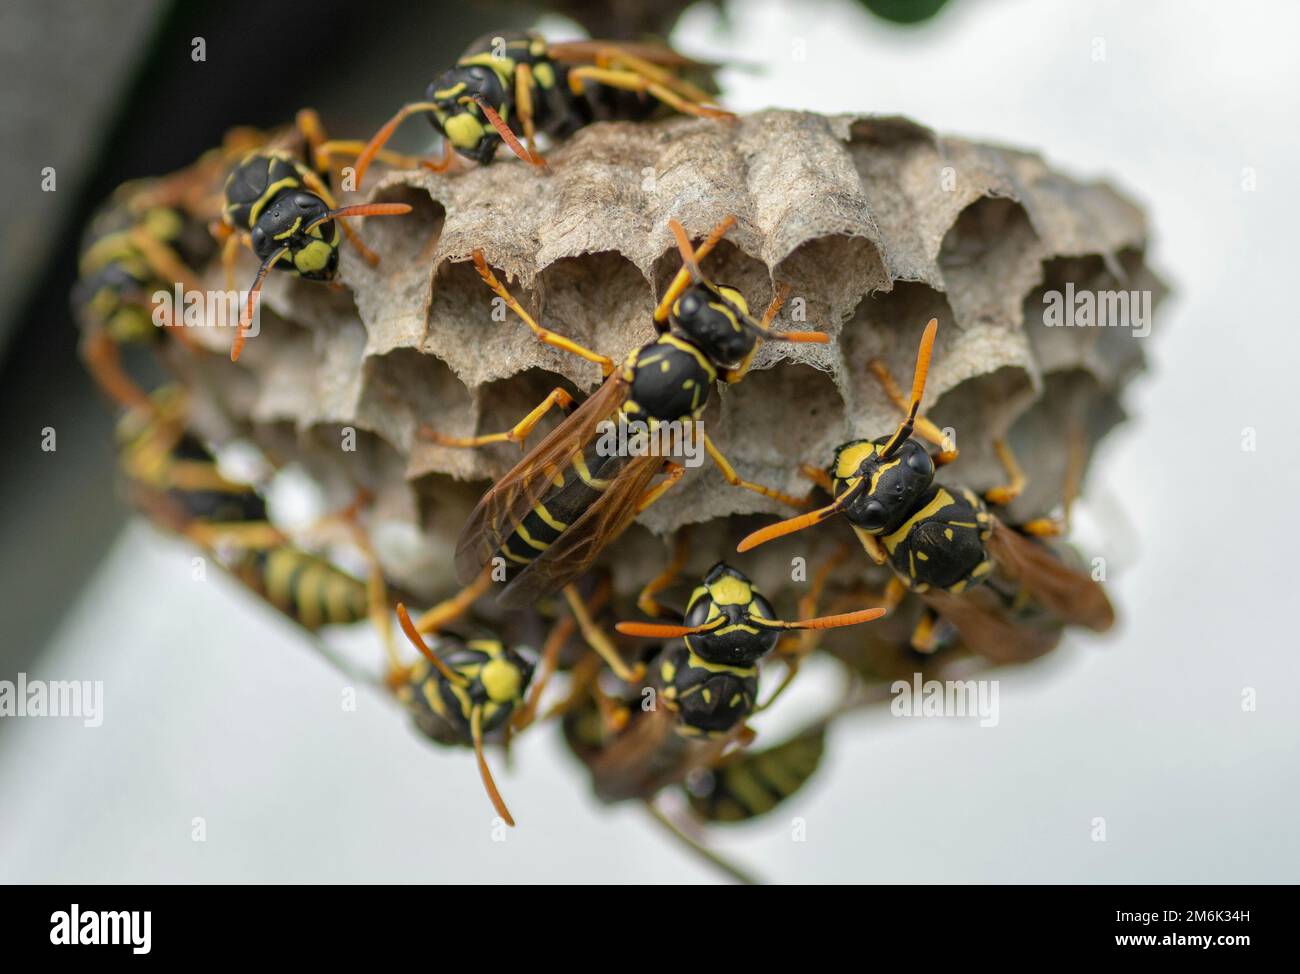 European wasp (Vespula germanica) building a nest to start a new colony. Stock Photo